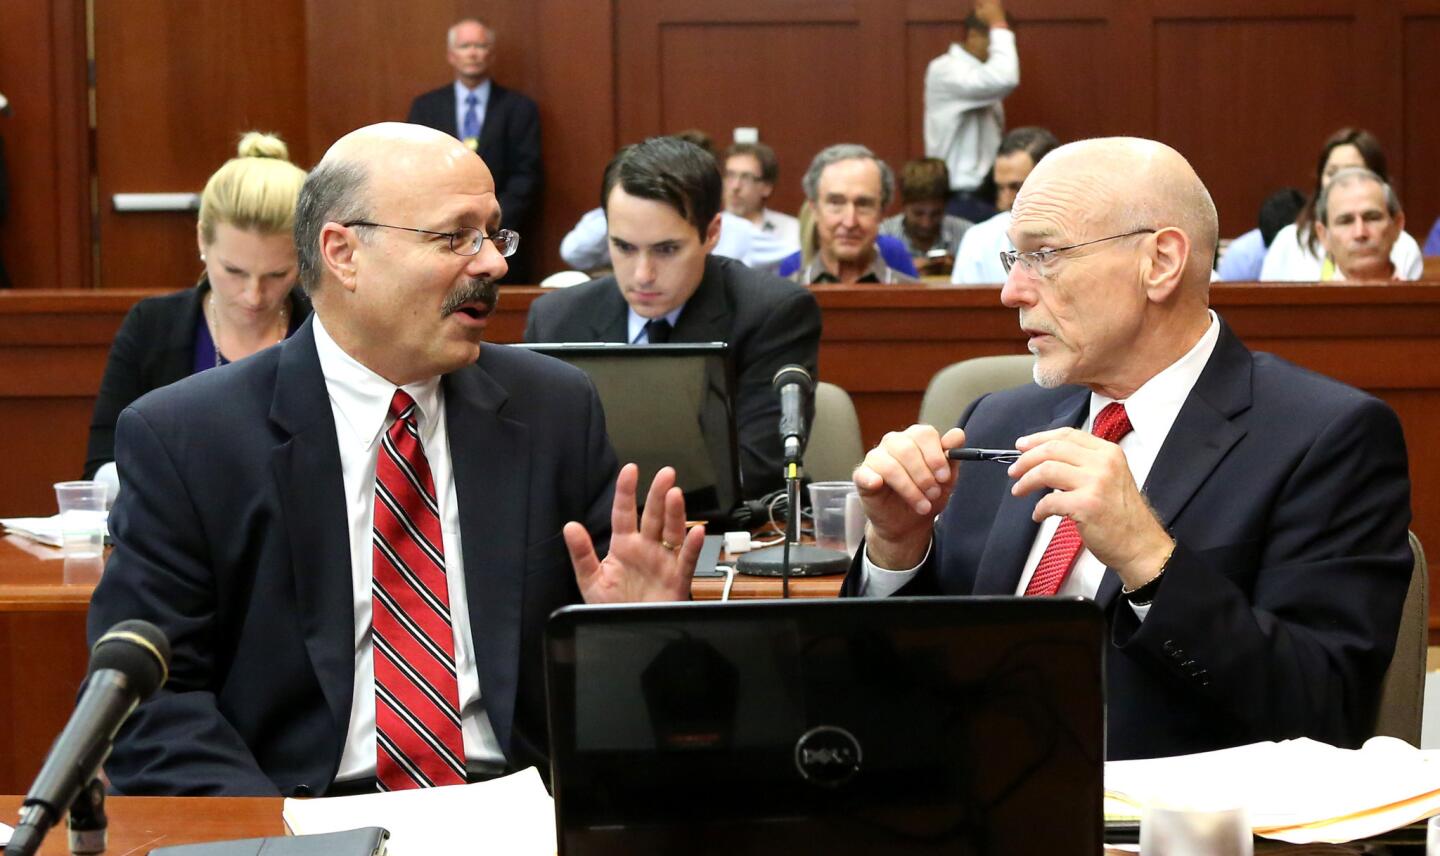 Prosecutor Bernie de la Rionda confers with defense counsel Don West (right) during a recess in the George Zimmerman trial in Seminole circuit court, in Sanford, Fla., Monday, July 8, 2013. Zimmerman is charged with 2nd-degree murder in the fatal shooting of Trayvon Martin, an unarmed teen, in 2012. (Joe Burbank/Orlando Sentinel/POOL) newsgate CCI B583043294Z.1